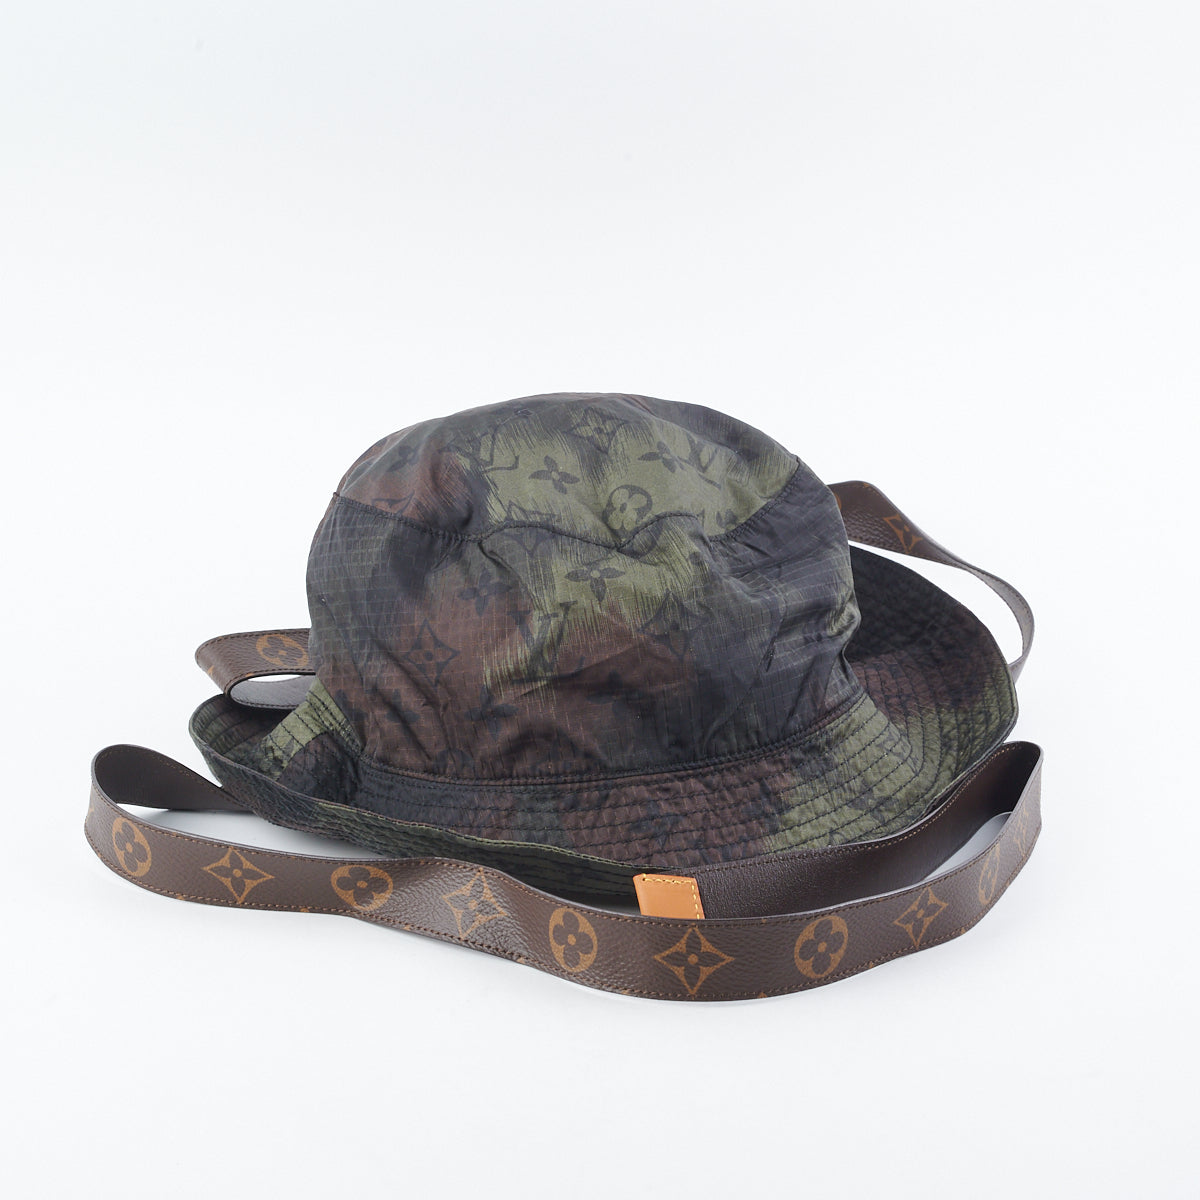 NWT Louis Vuitton Tapestry Reversible Bucket Hat Size 60 100% Authentic  RARE!!